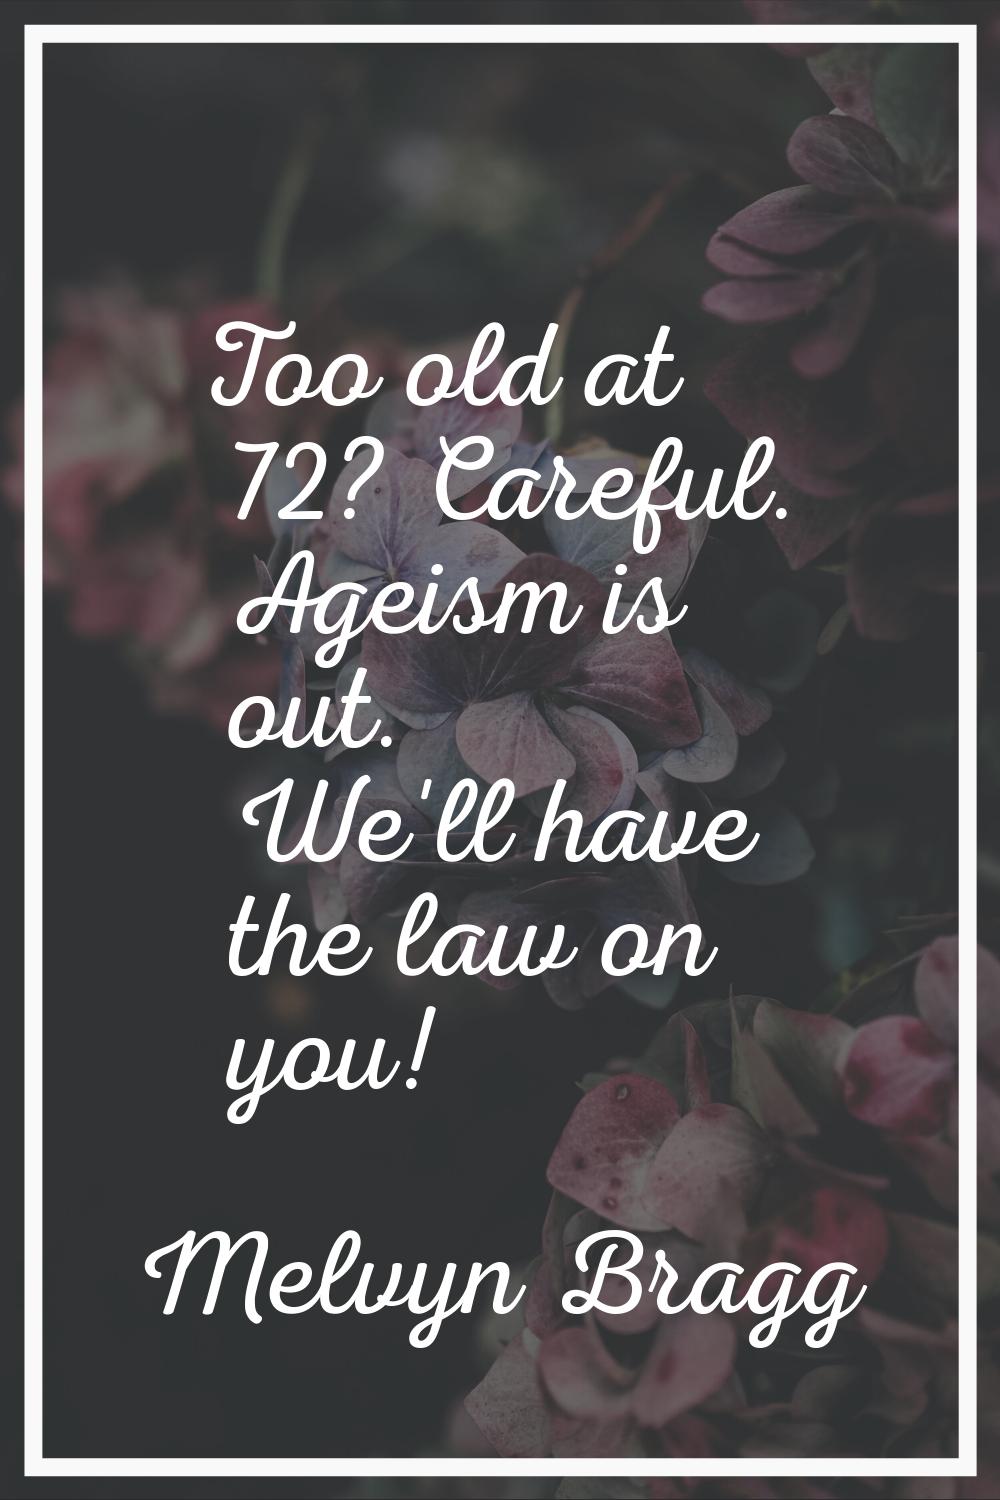 Too old at 72? Careful. Ageism is out. We'll have the law on you!